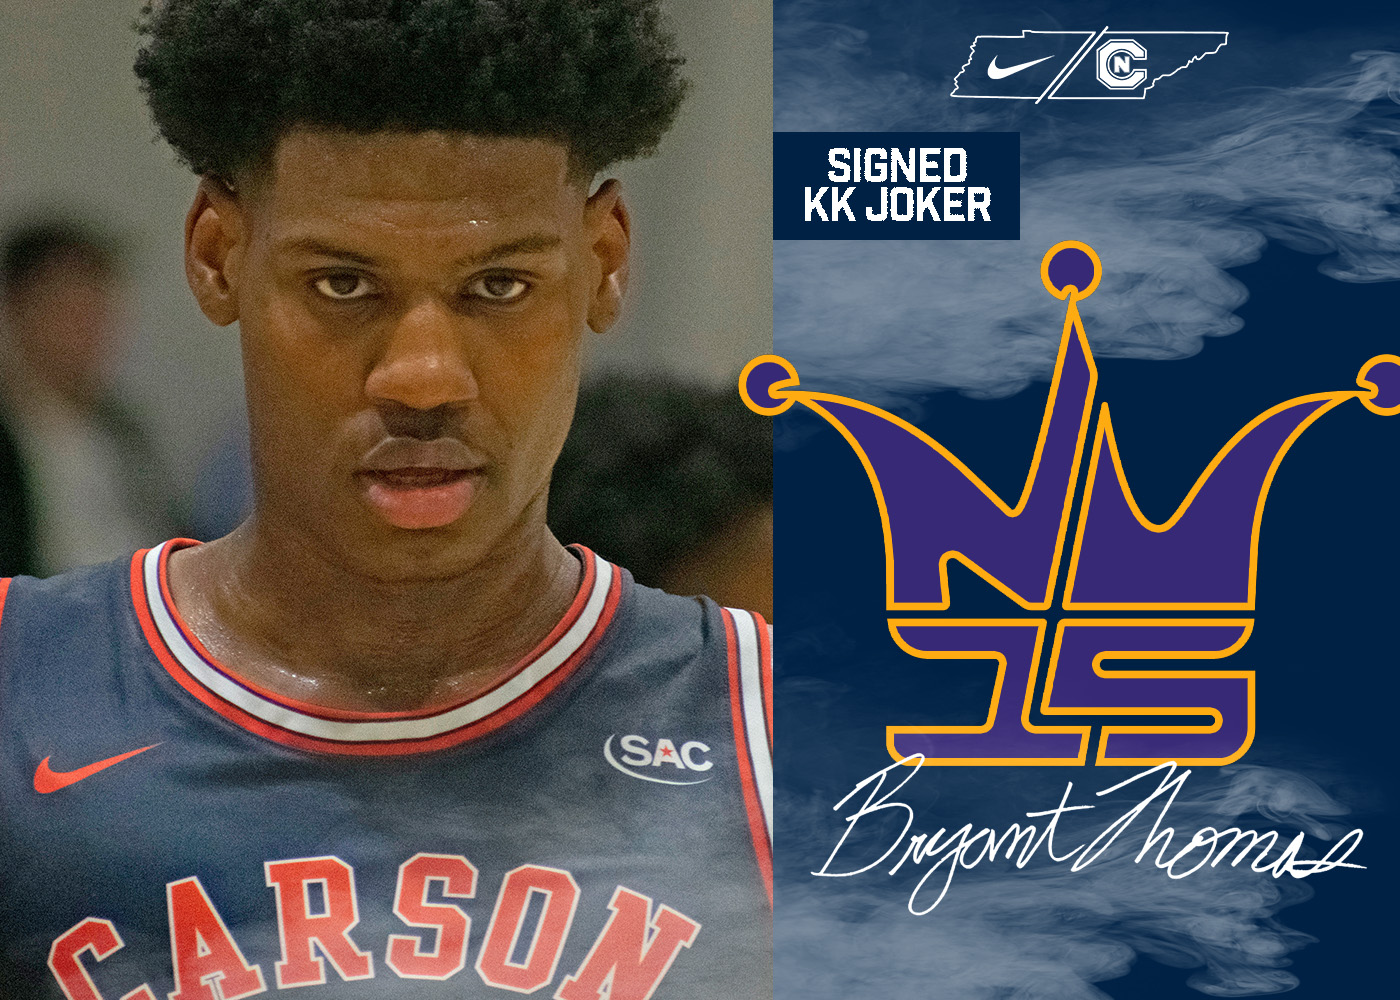 Eagle in the pros, Thomas signs with Serbia’s KK Joker